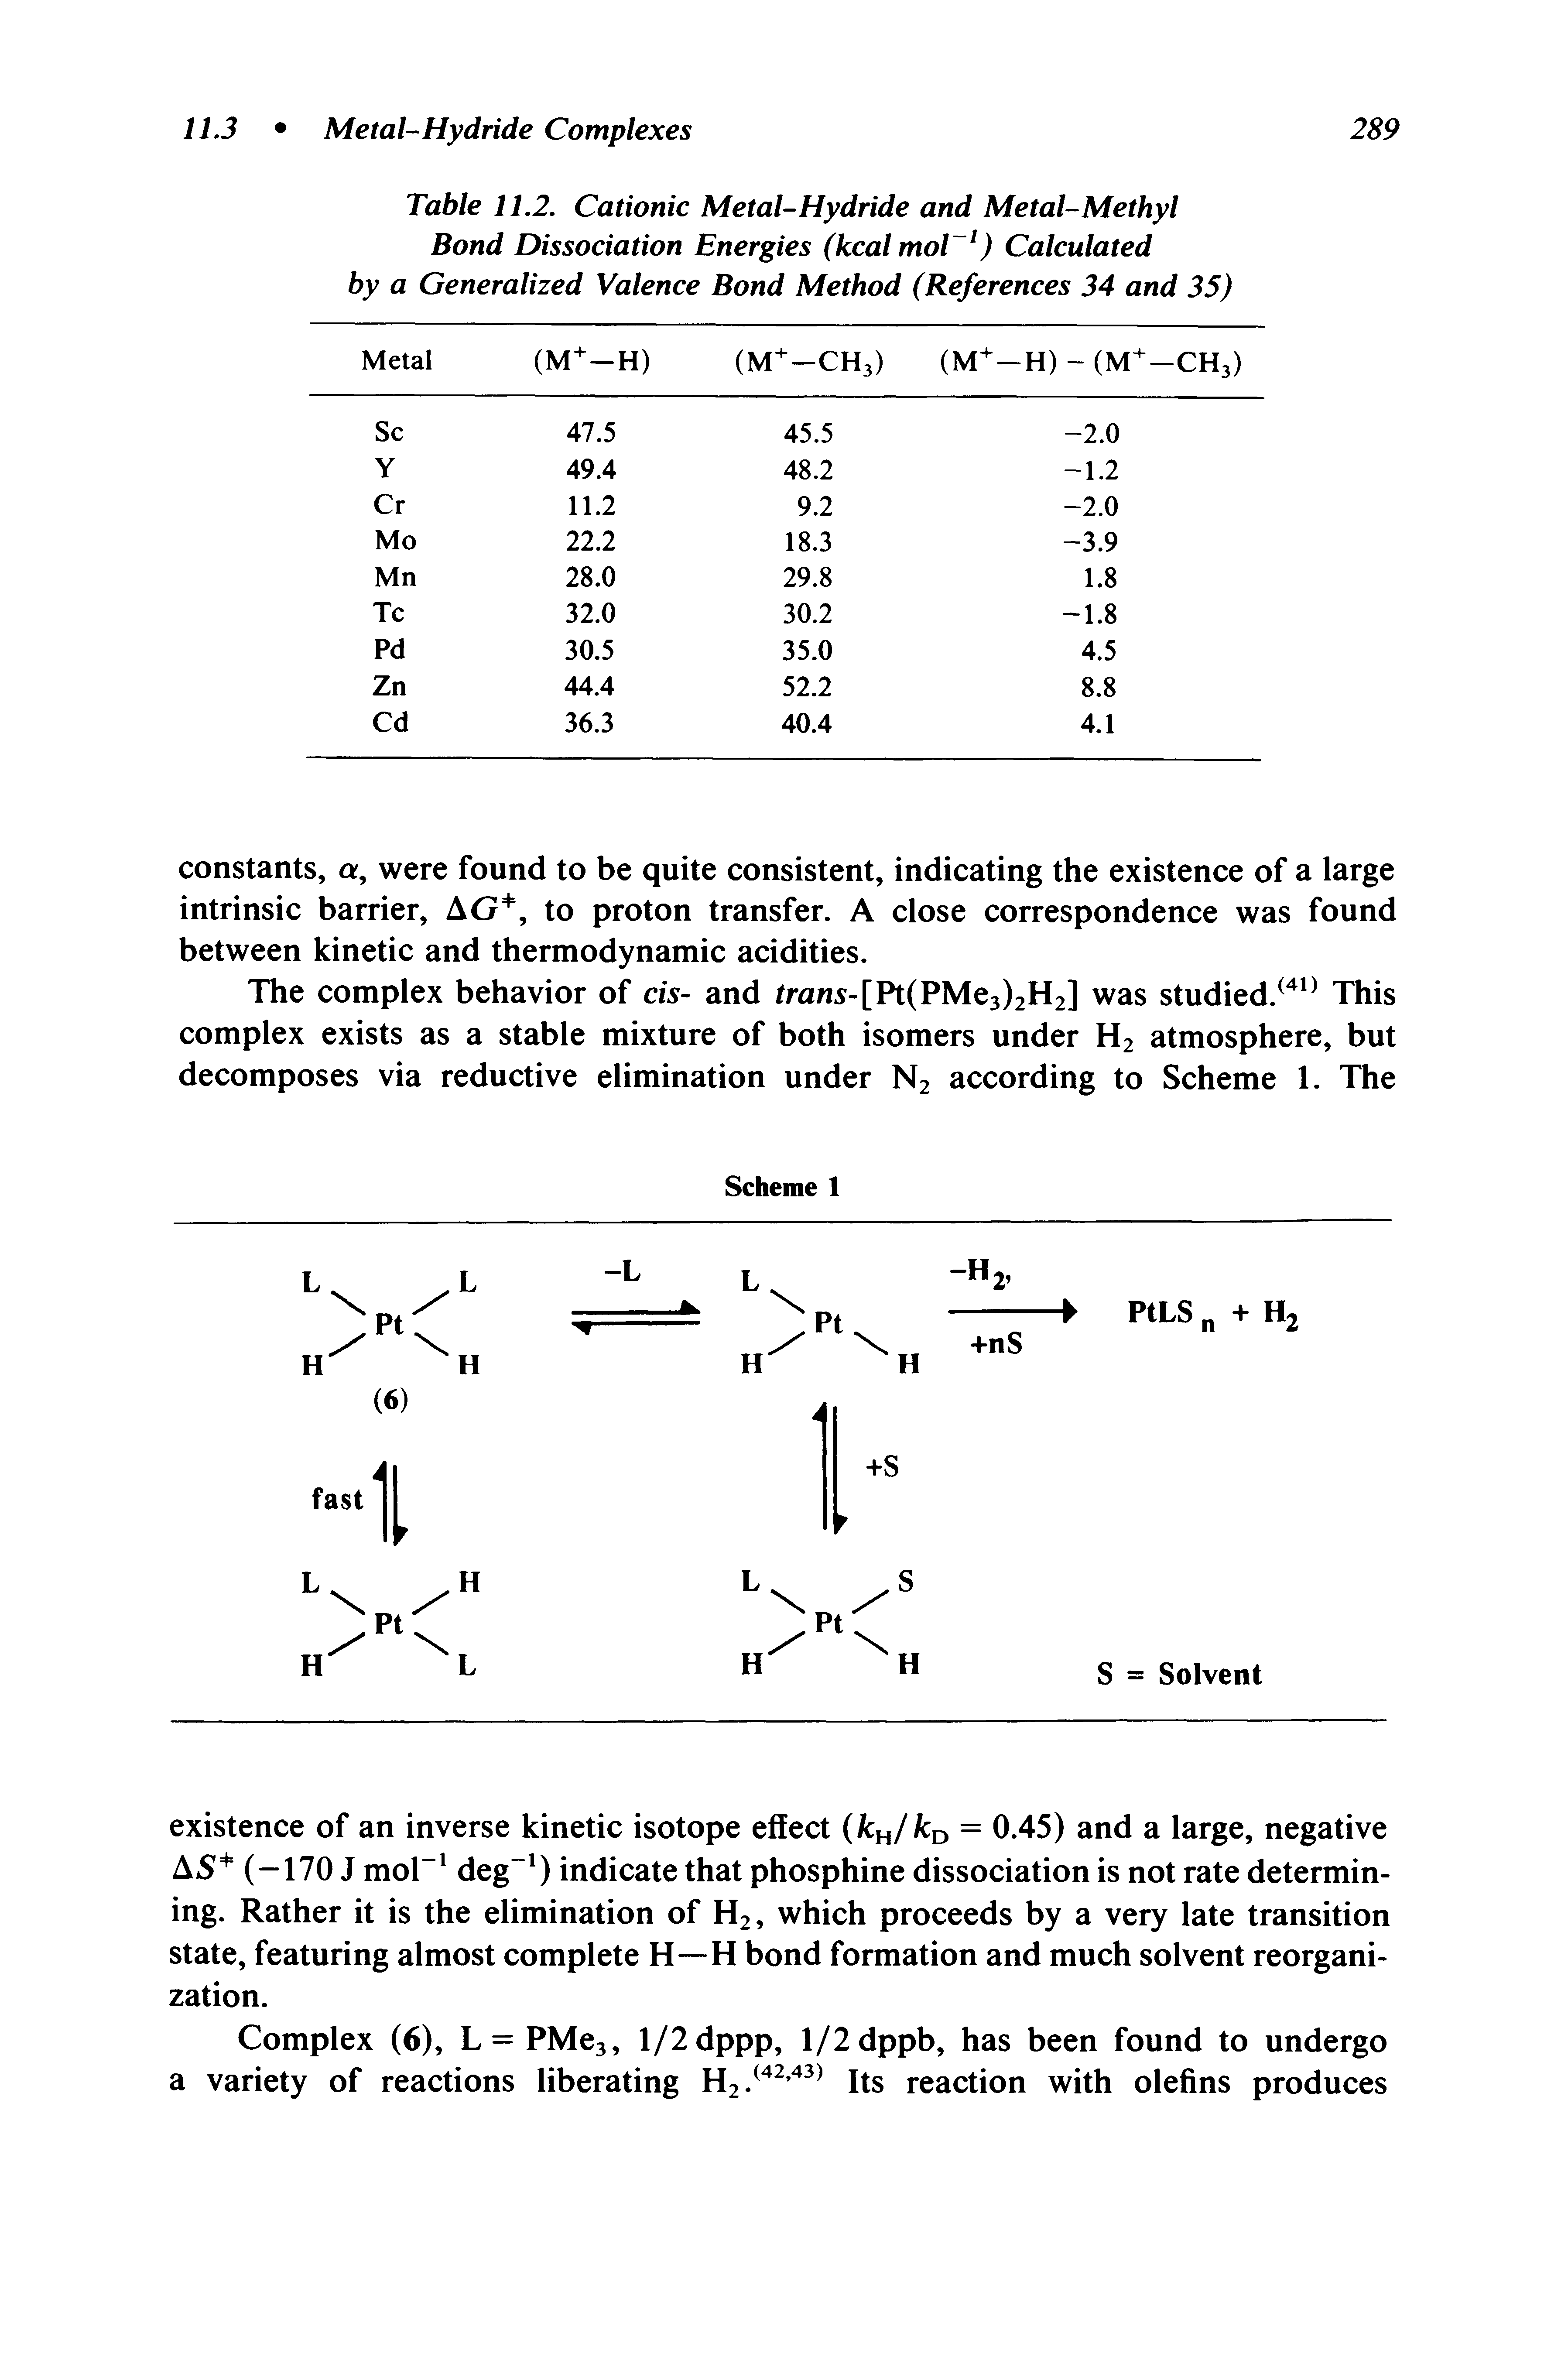 Table 11.2. Cationic Metal-Hydride and Metal-Methyl Bond Dissociation Energies (heal mol ) Calculated by a Generalized Valence Bond Method (References 34 and 35) ...